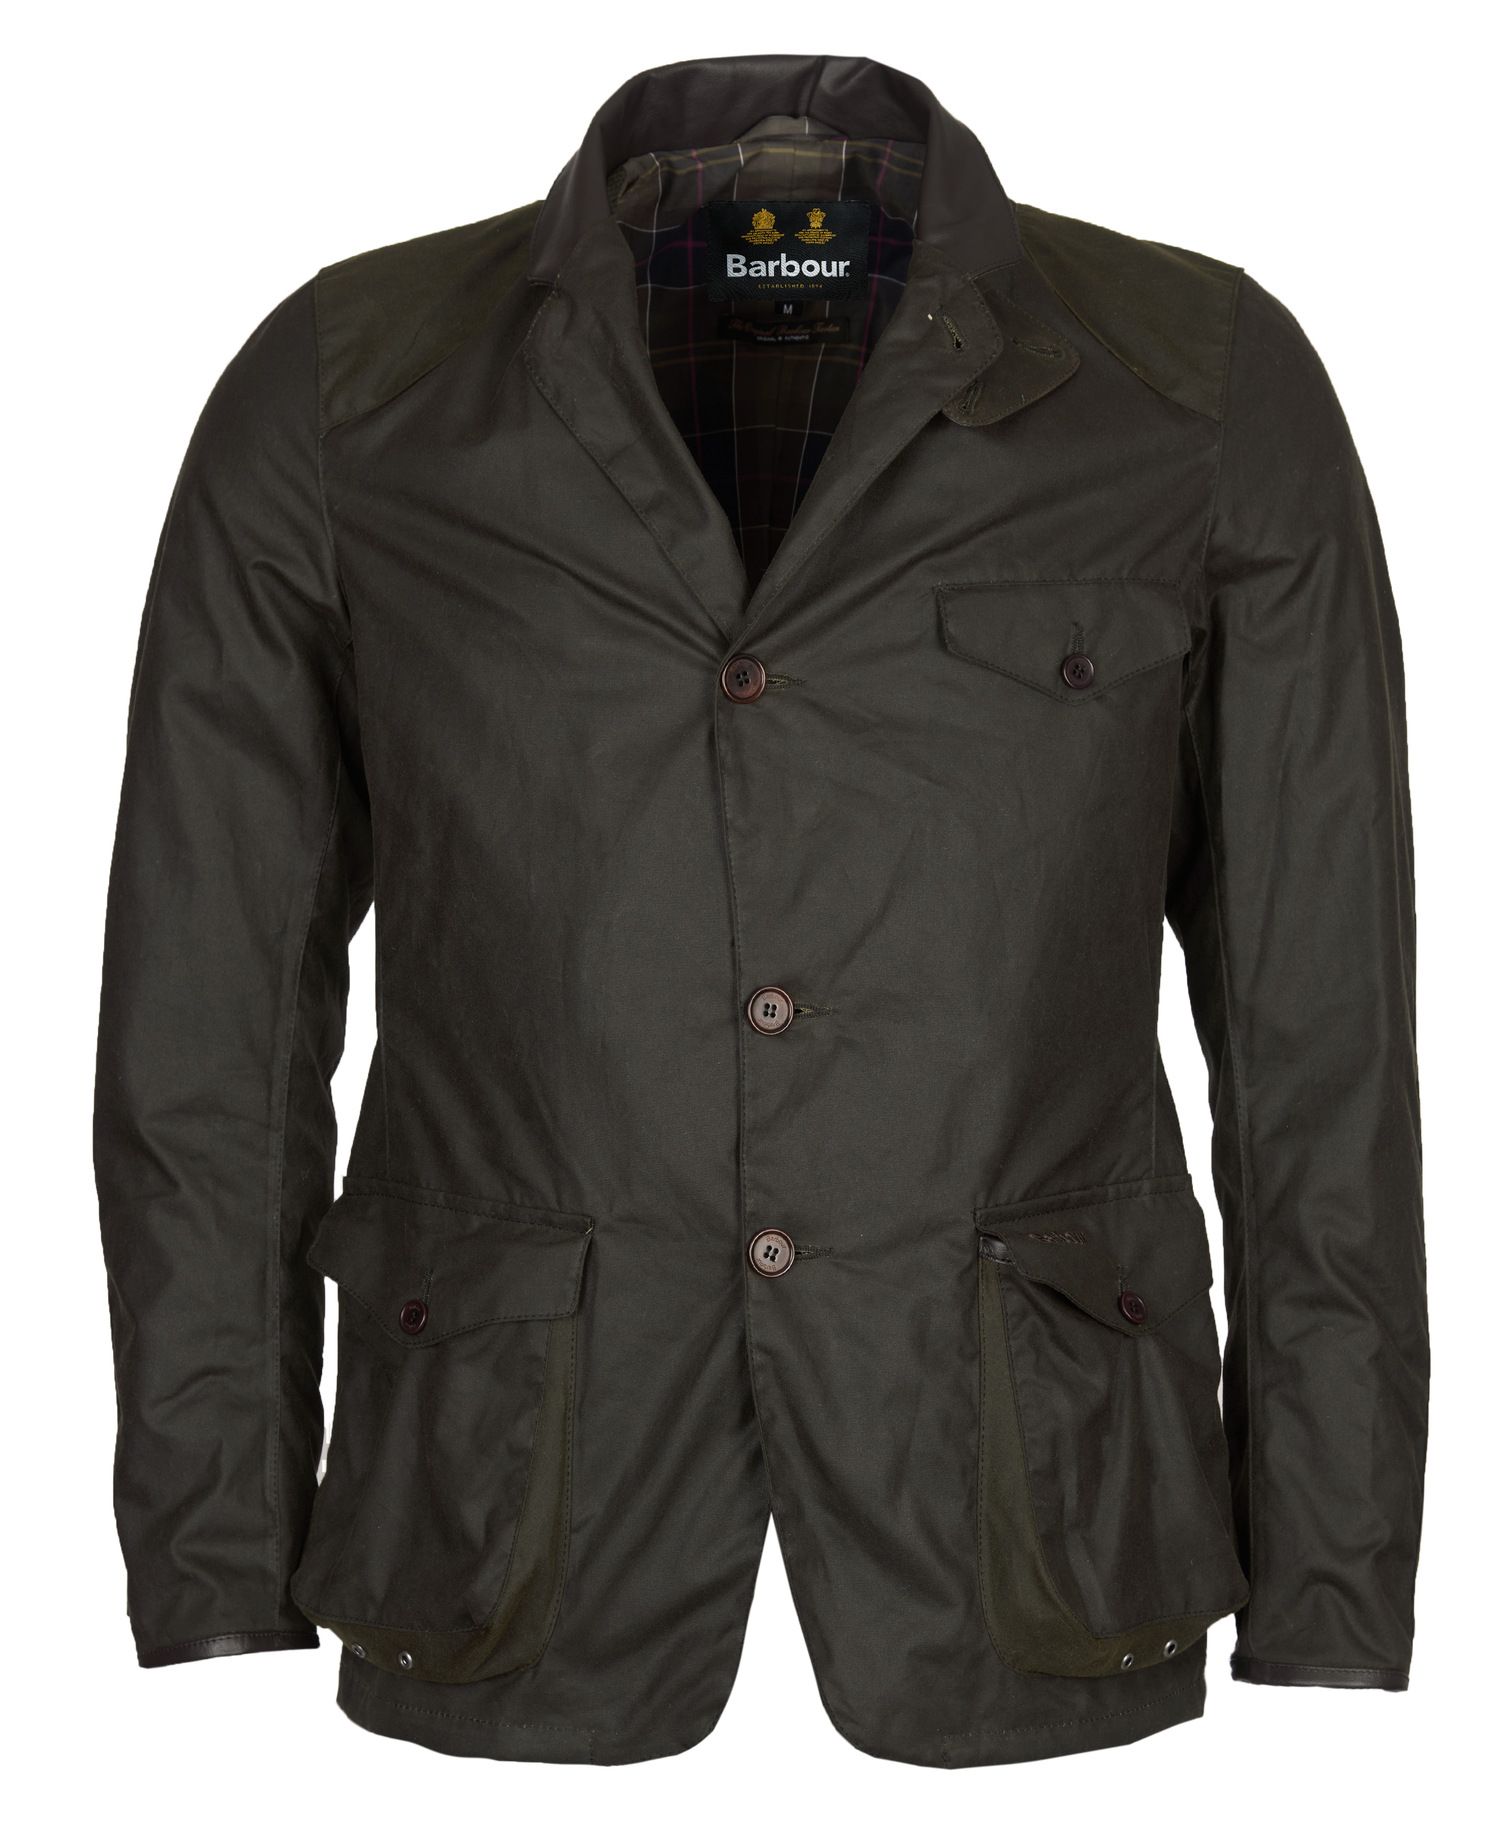 Barbour Beacon Sports Wax Jacket Olive